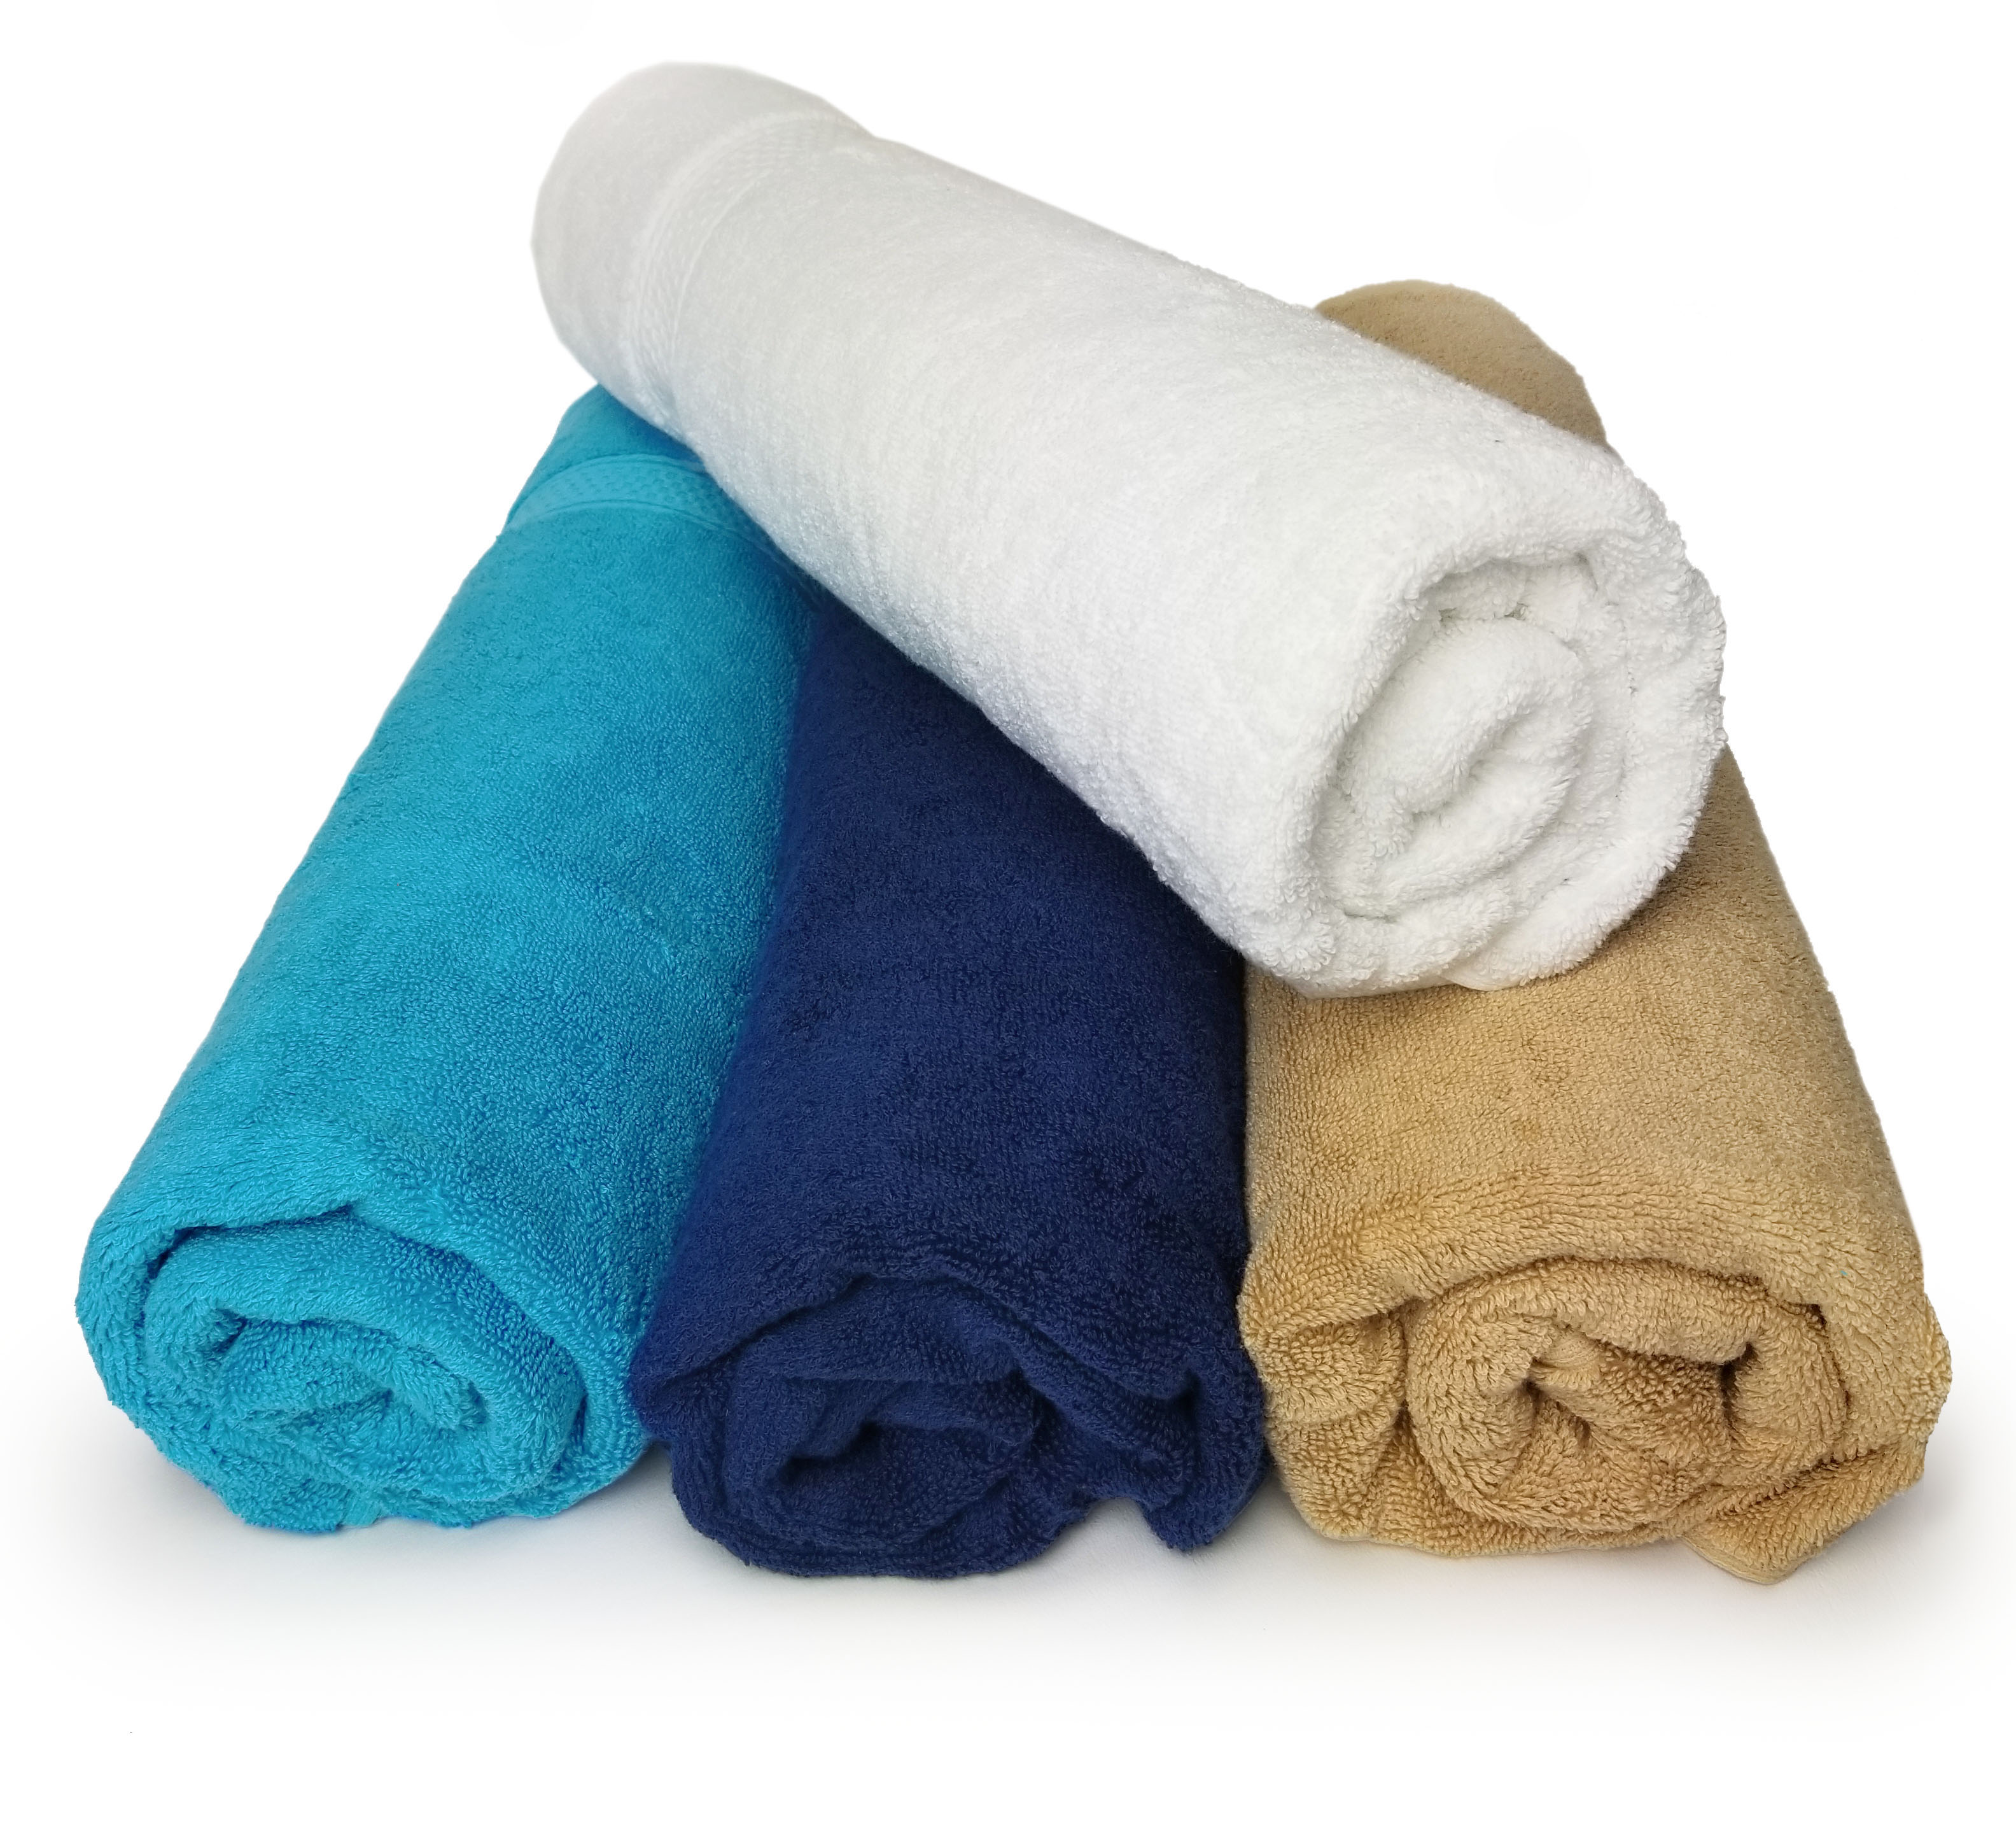 SHIPPING INCLUDED  24x48 Bath Towels by Royal Comfort 10.8 Lbs/Dz  Woven   RING SPUN COTTON 